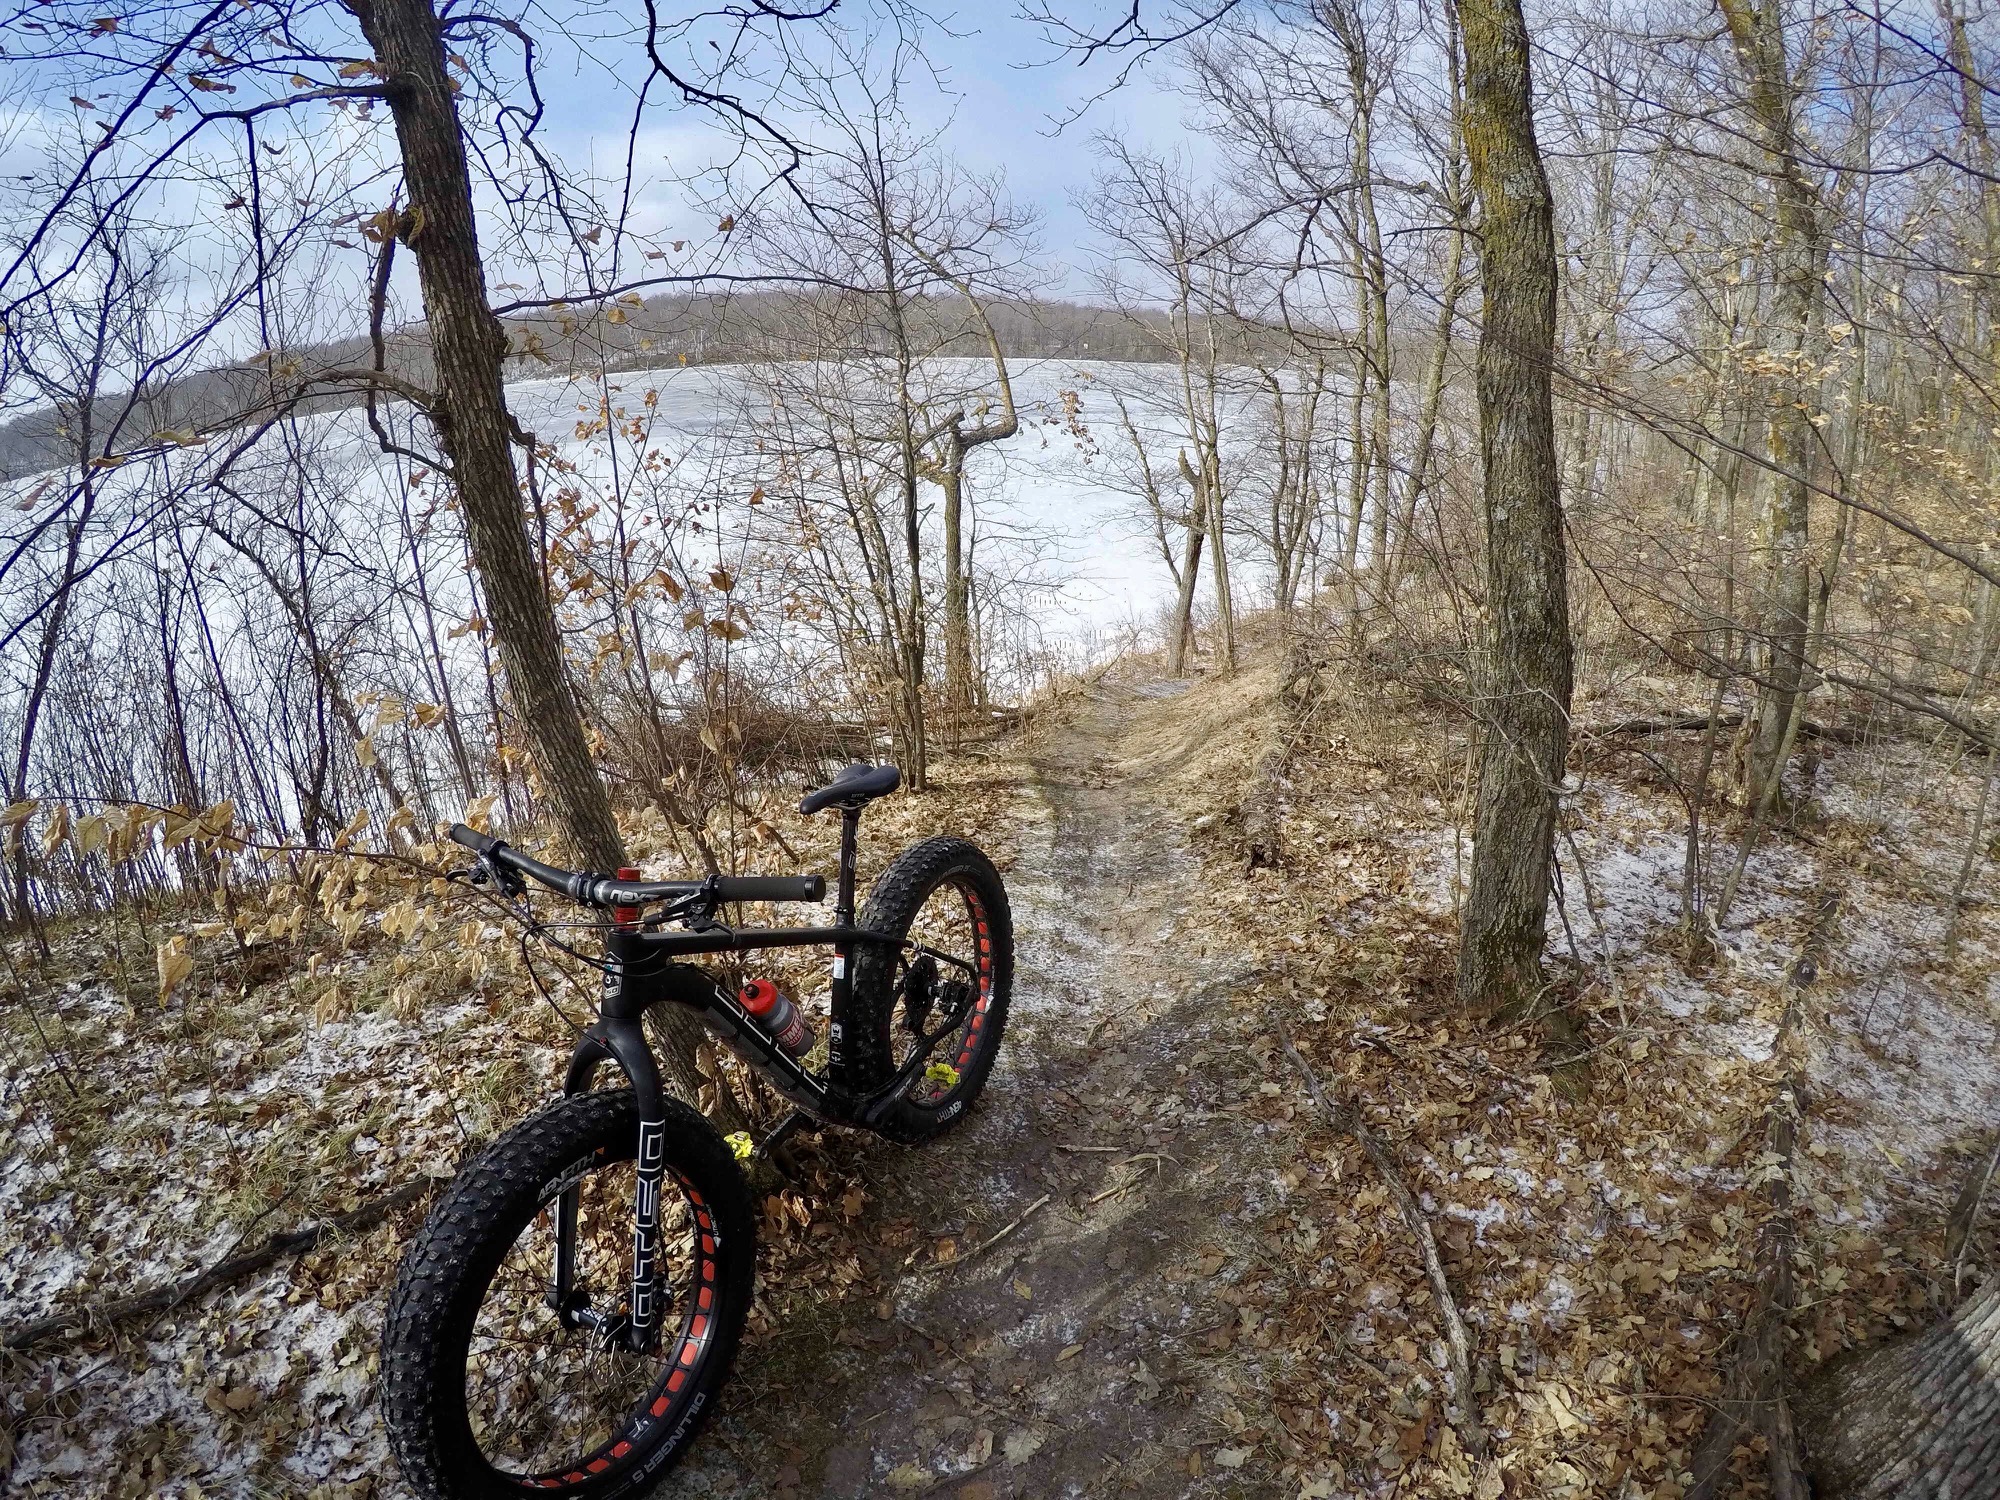 Top of lakeside singletrack, March 7th, 2017. Great riding thanks to rock solid frozen ground. 